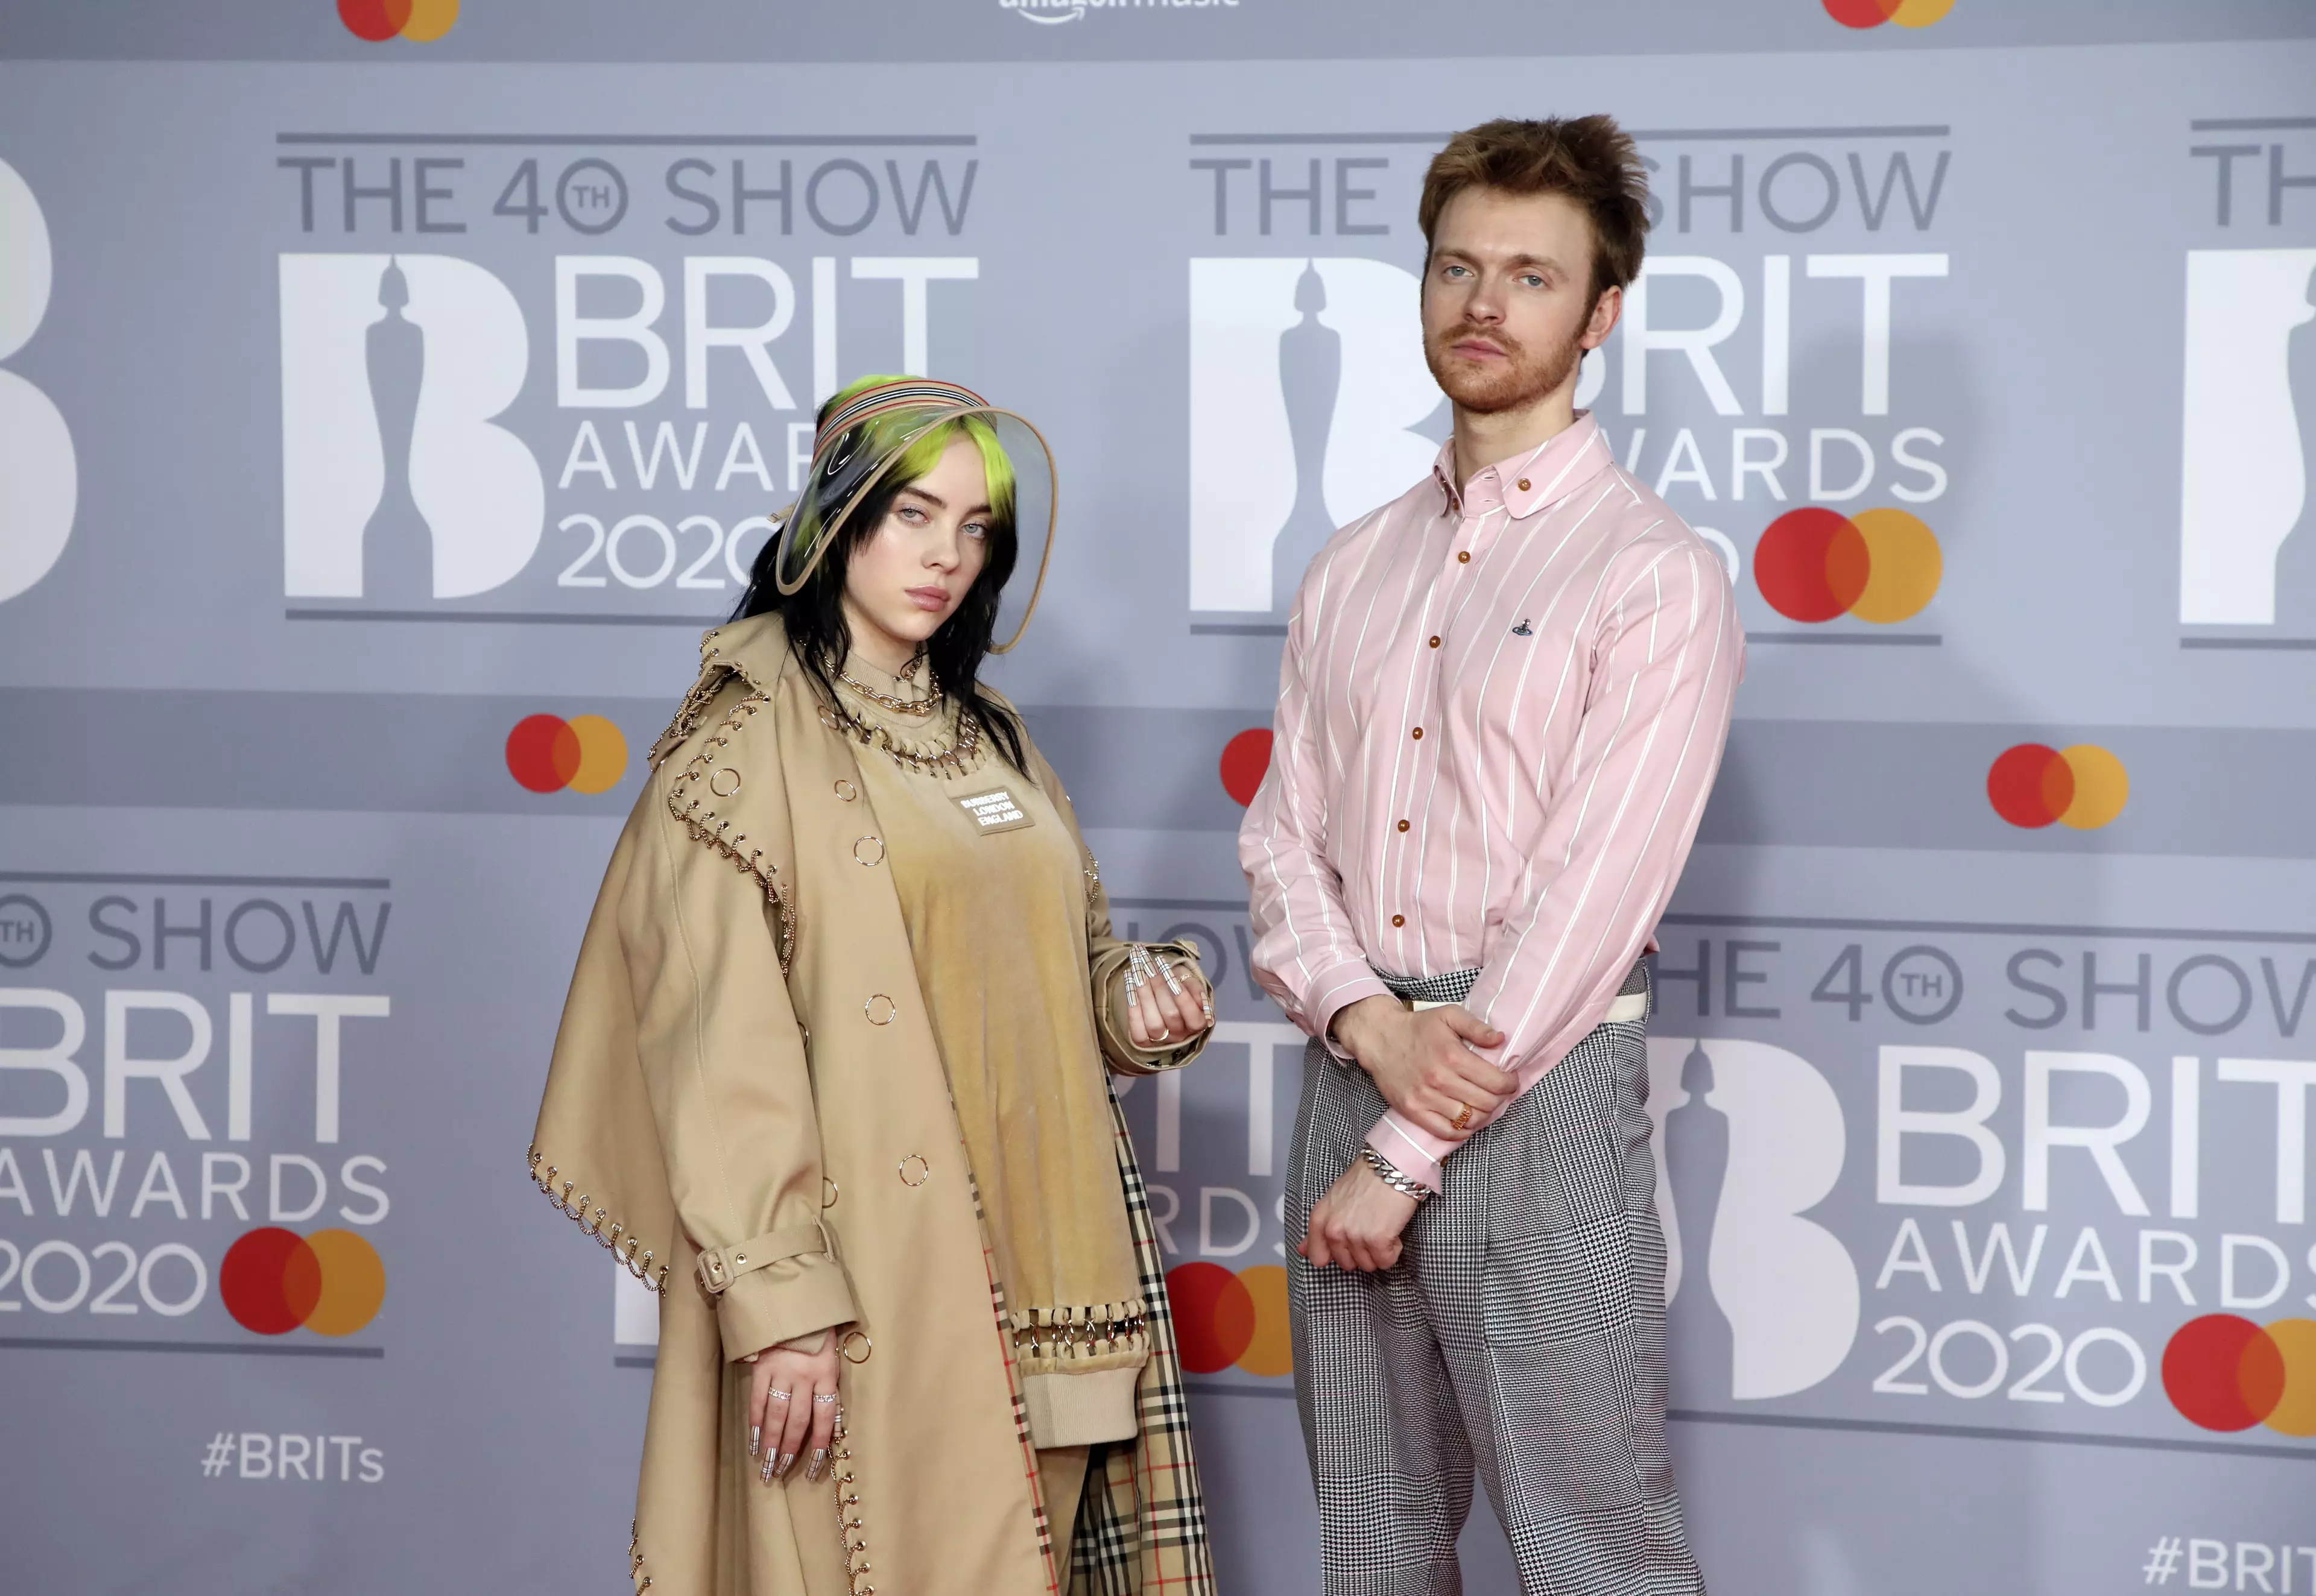 Billie Eilish and Finneas O'Connell at the 2020 BRIT Awards.